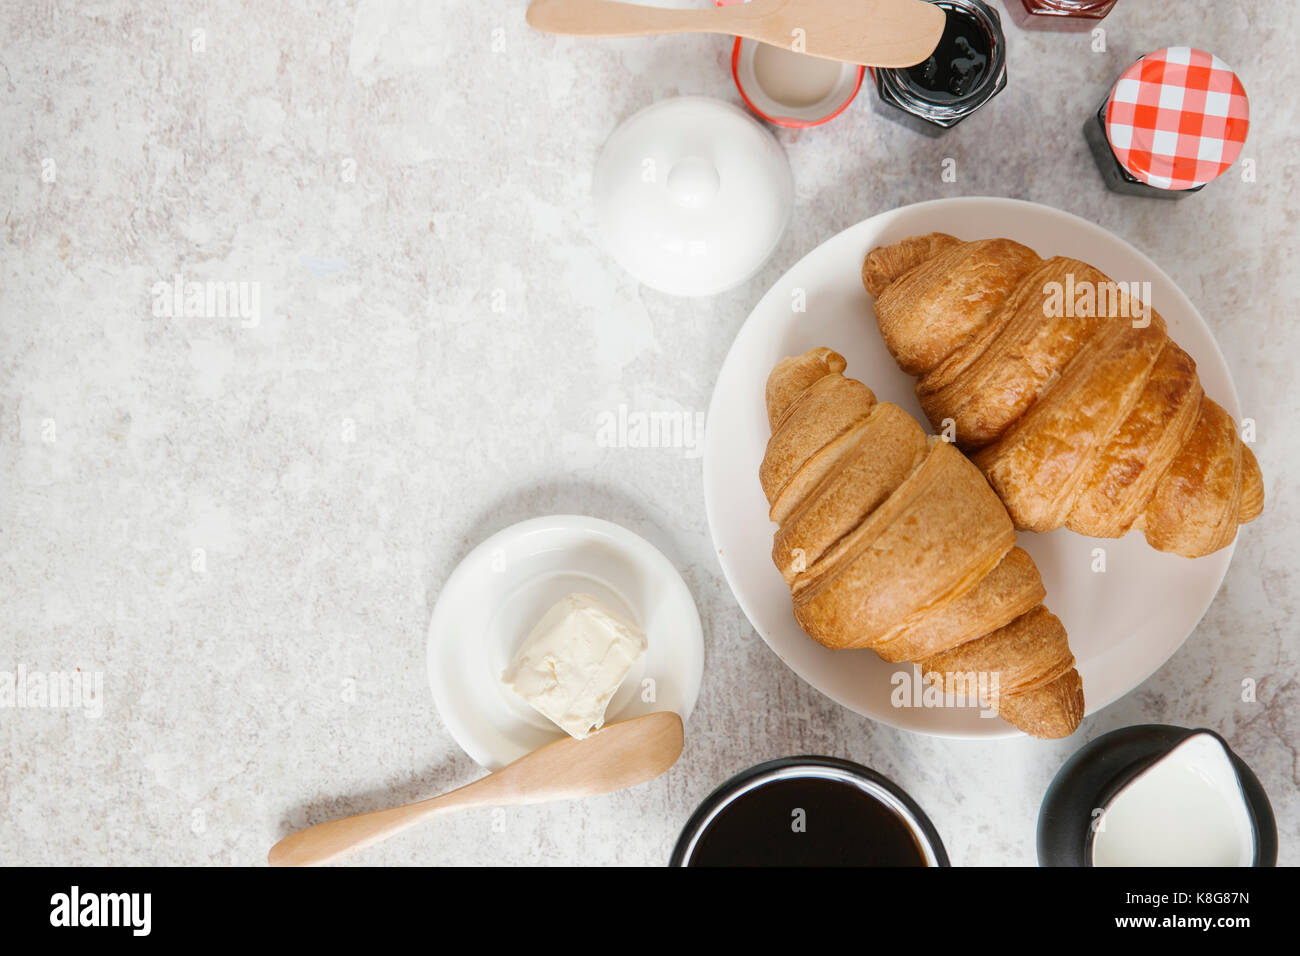 Overhead view of croissants served in plate on table Stock Photo